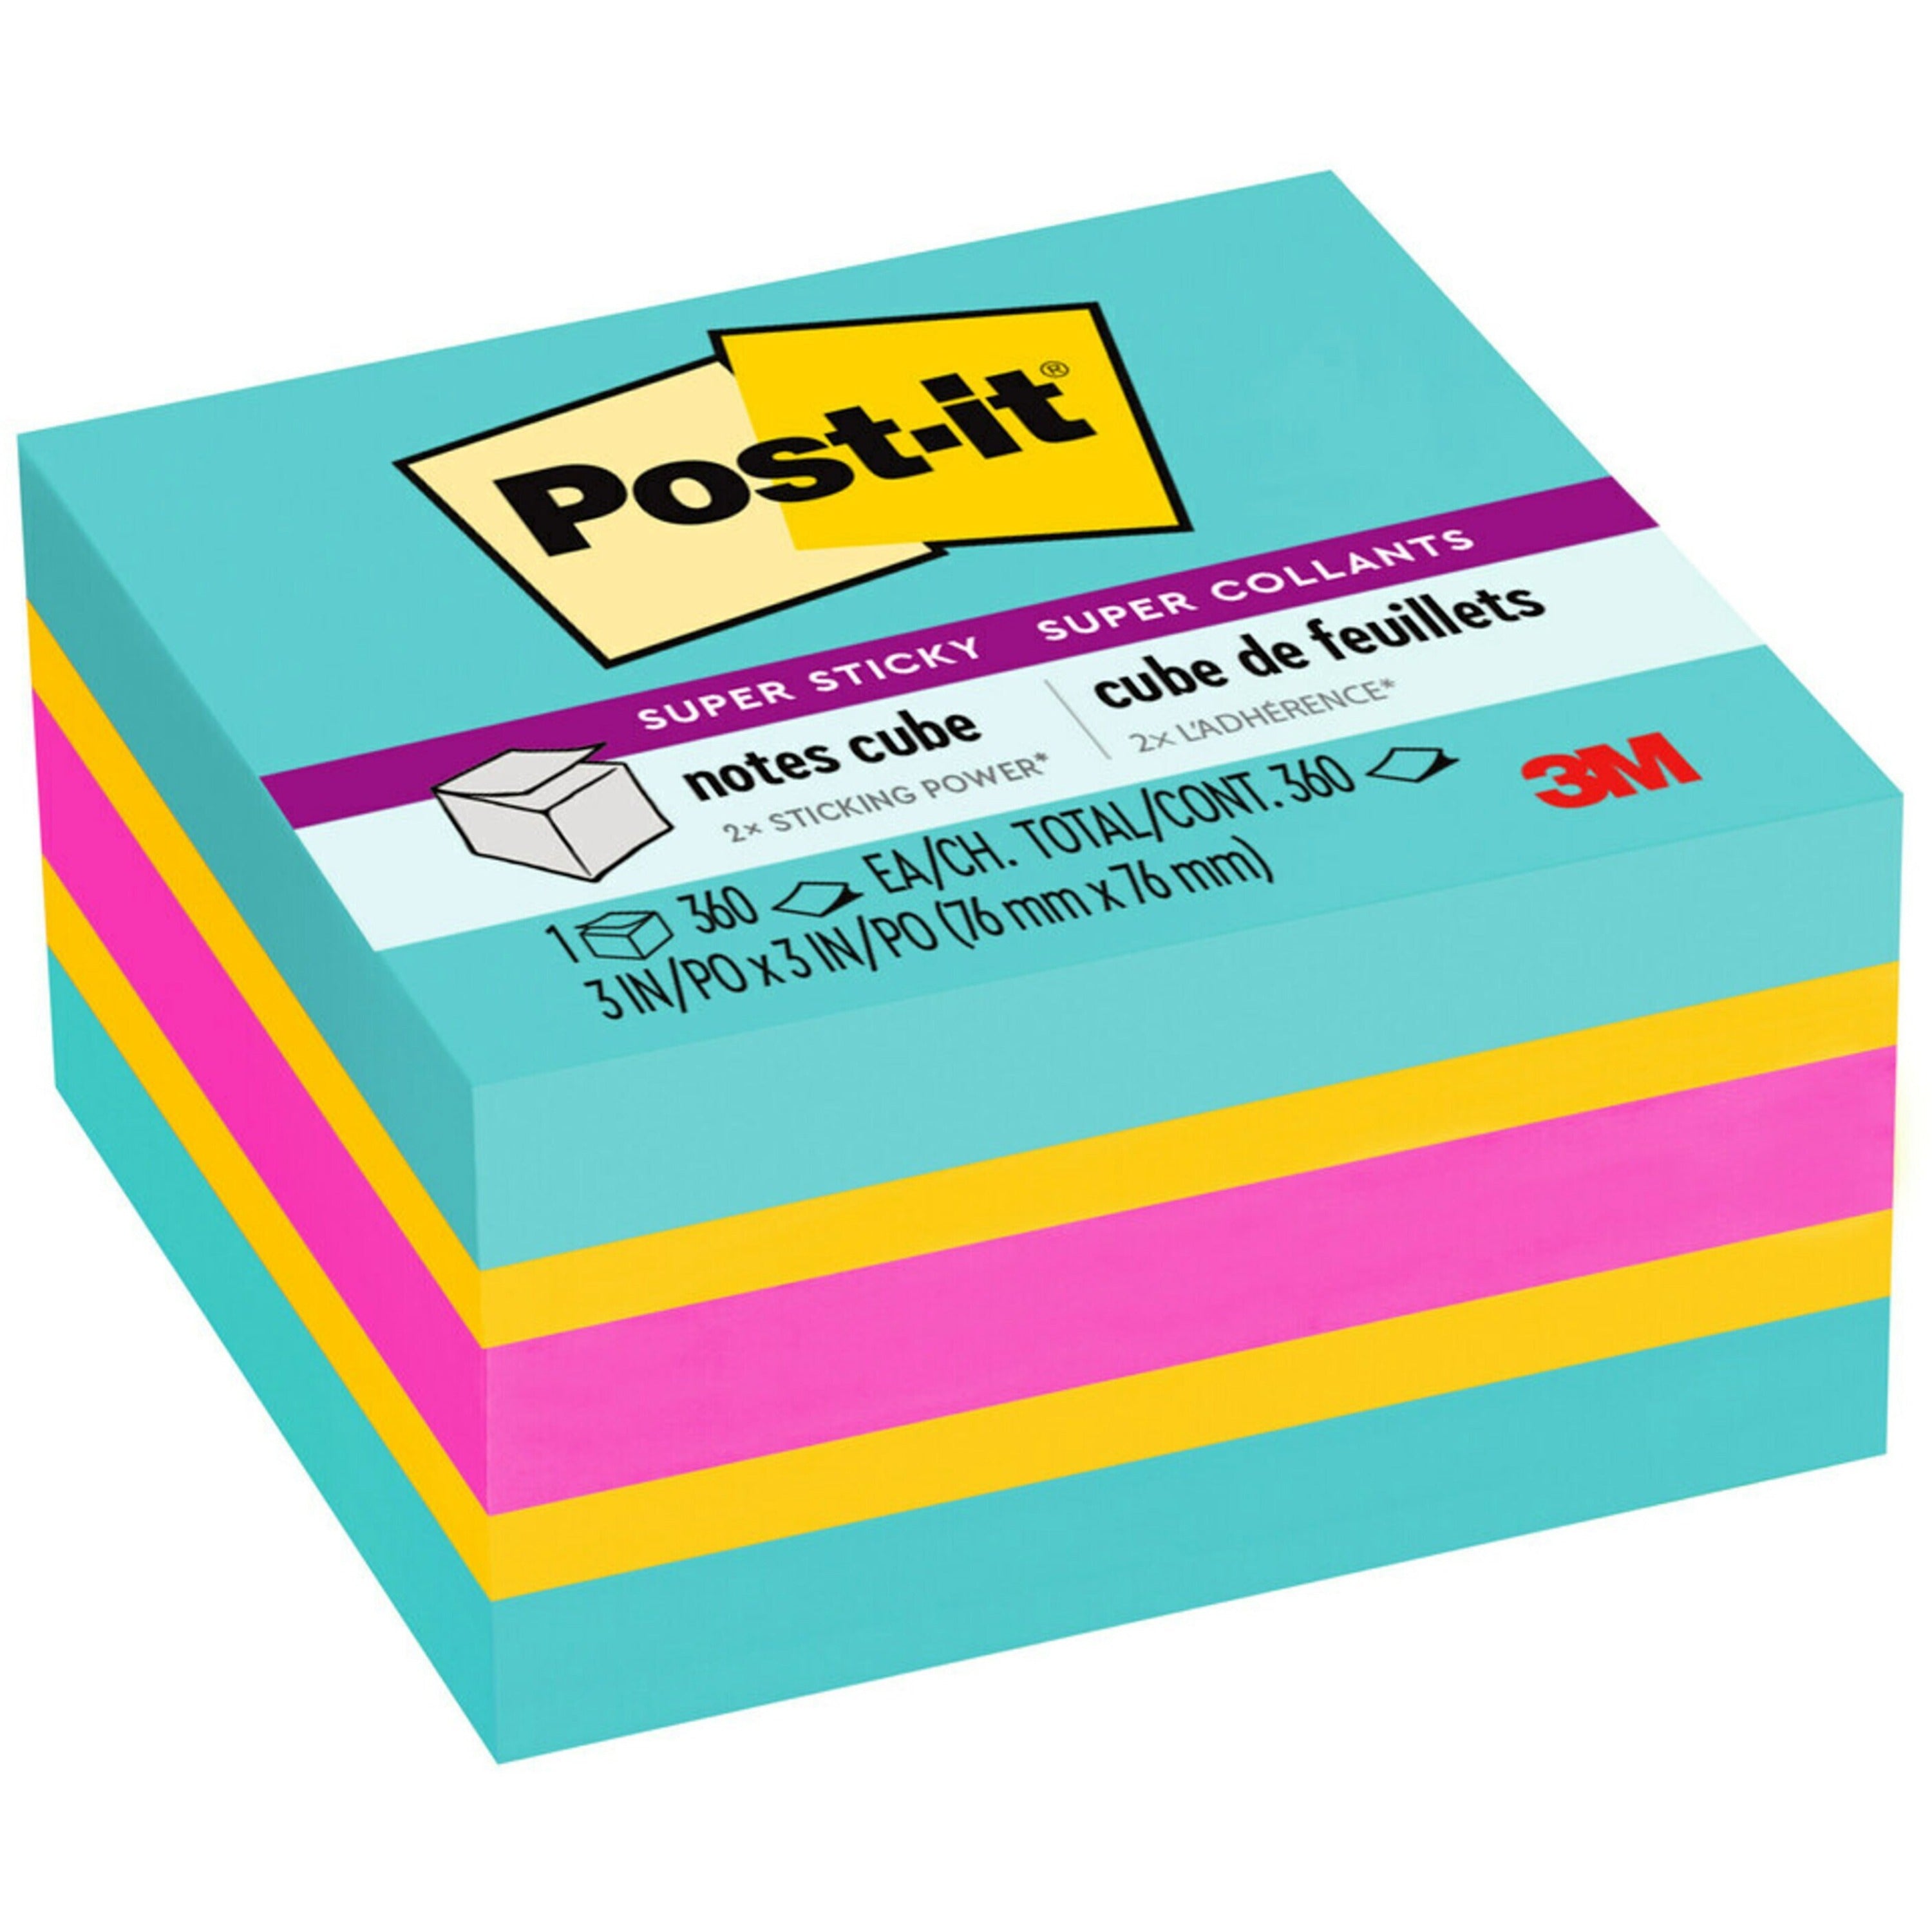 post-it-super-sticky-notes-cube-3-x-3-square-360-sheets-per-pad-aqua-splash-sunnyside-power-pink-paper-sticky-recyclable-1-pack_mmm2027ssafg - 1